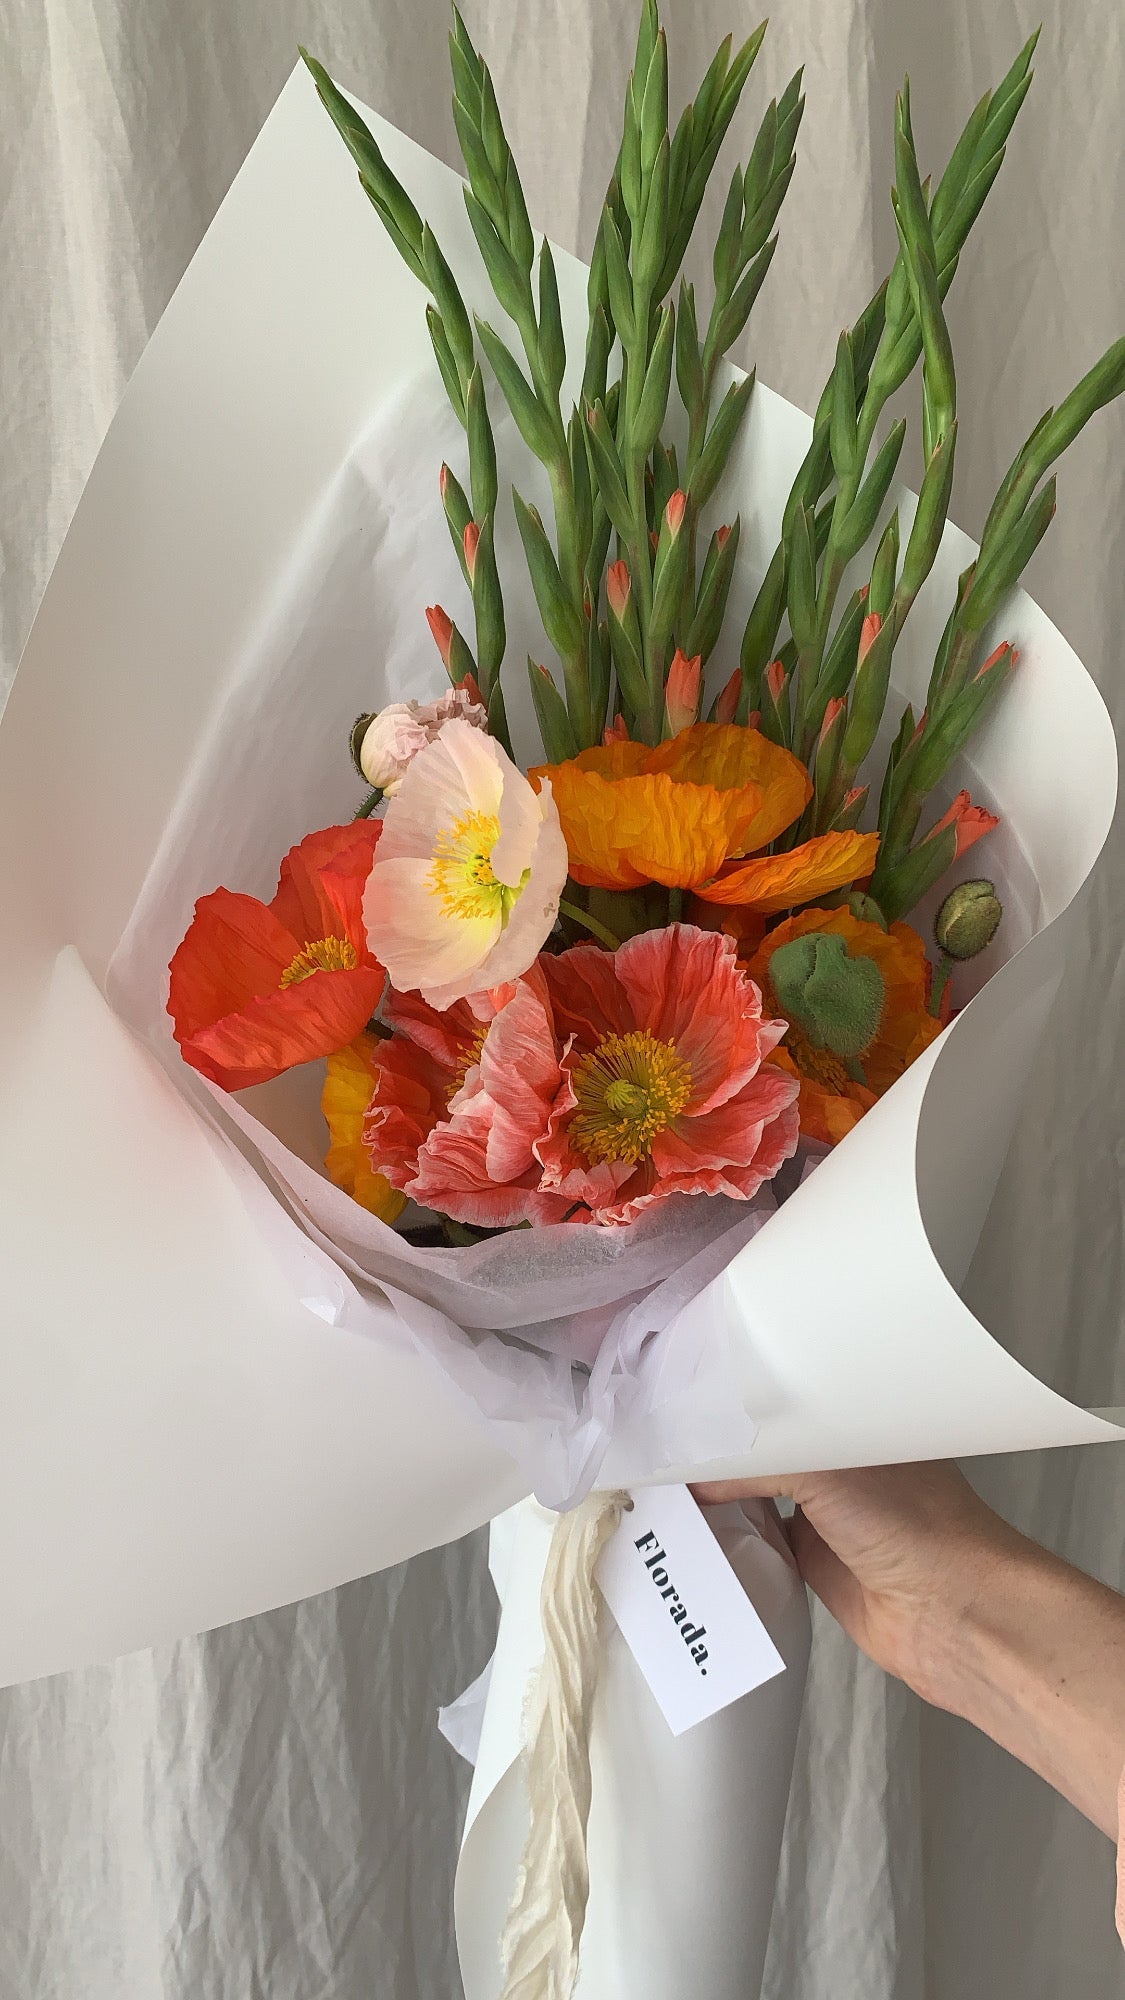 Posie of colourful poppies and mini gladioli wrapped in Florada gift wrap and silk ribbon, 